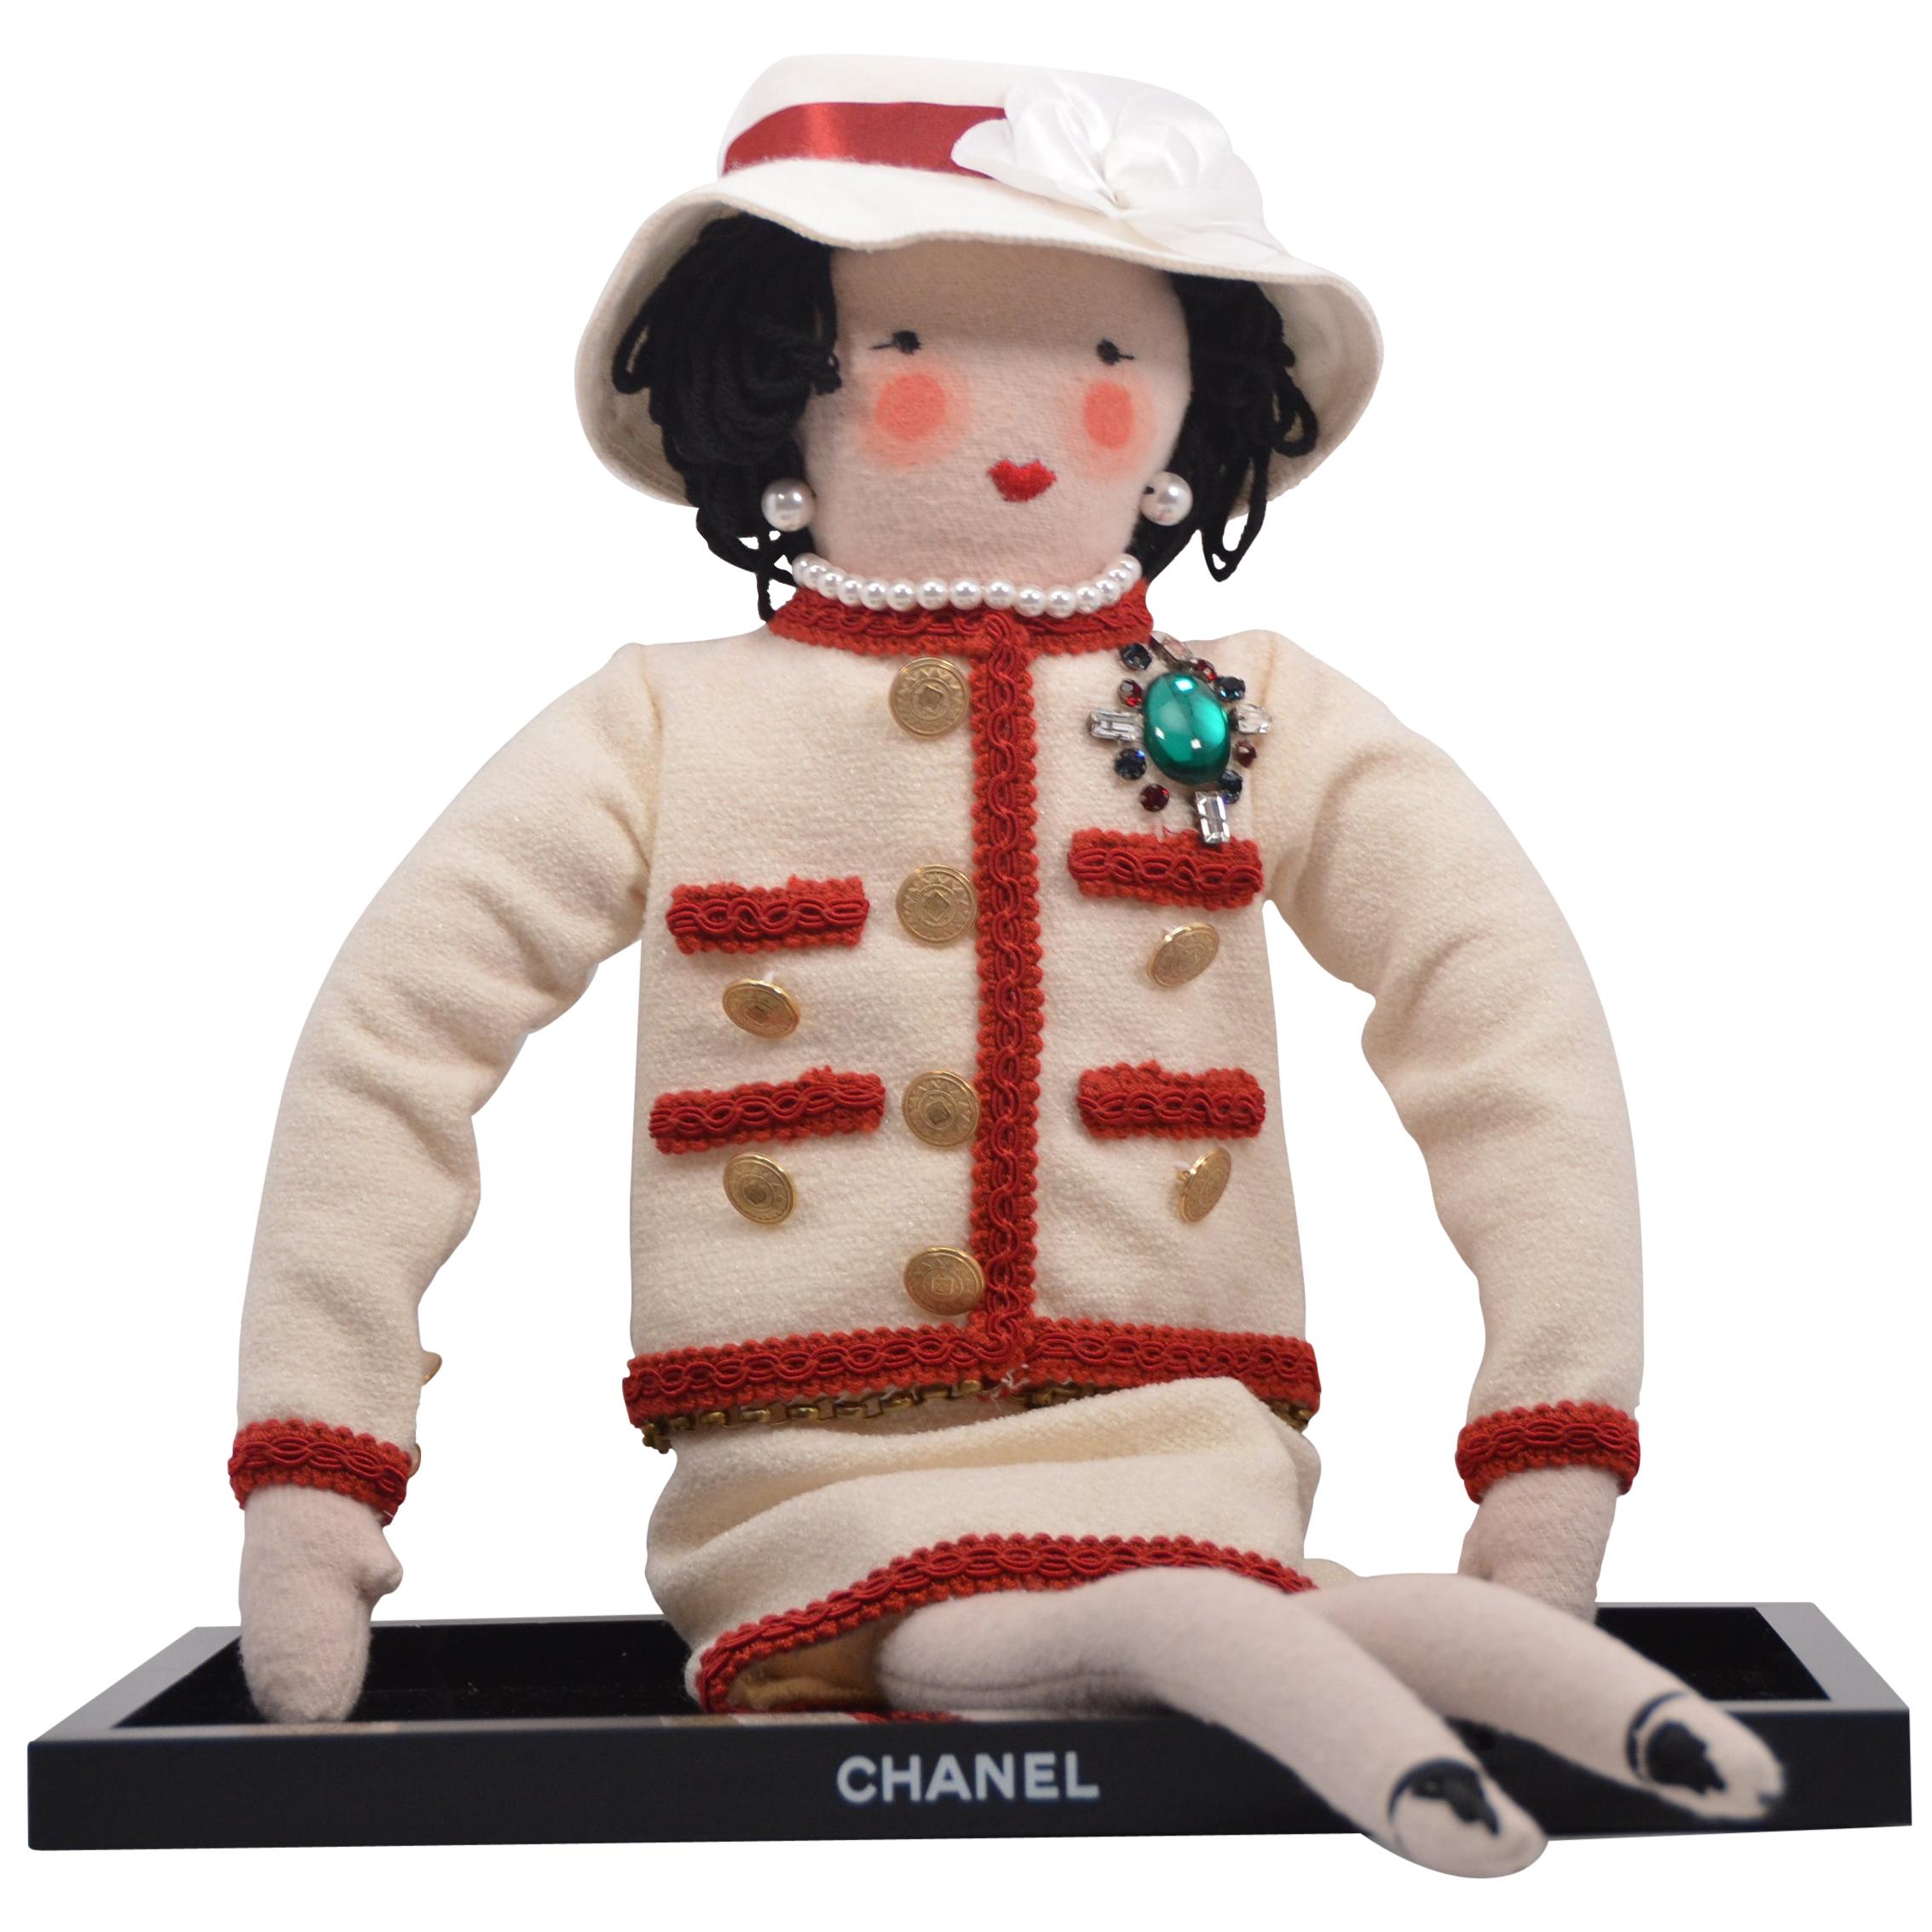 Coco Mademoiselle Chanel Doll Designed By Karl Lagerfeld 2010